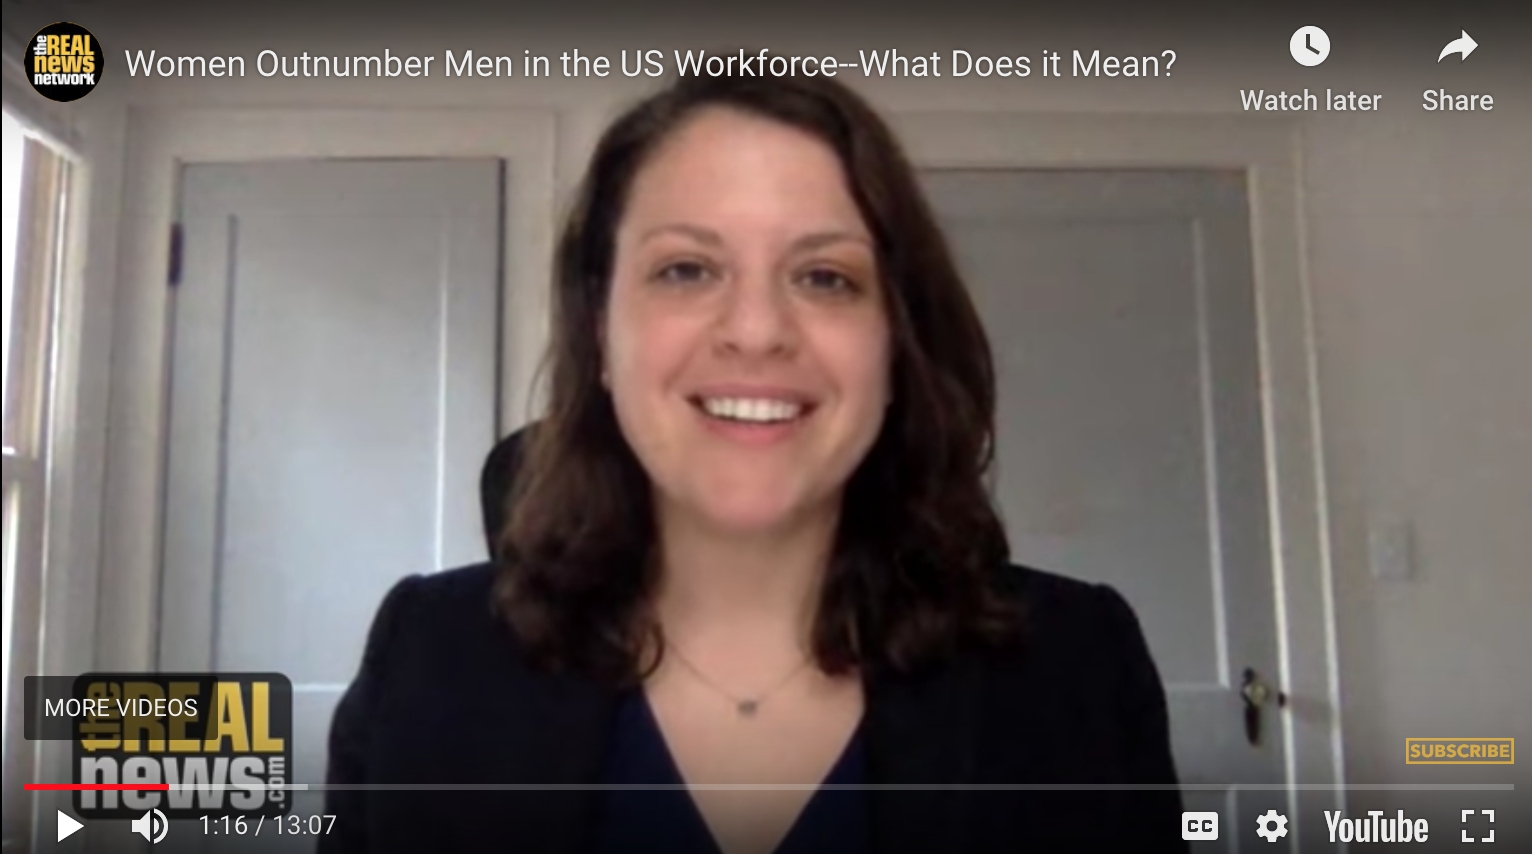 Women Outnumber Men in the U.S. Workforce–What Does it Mean?